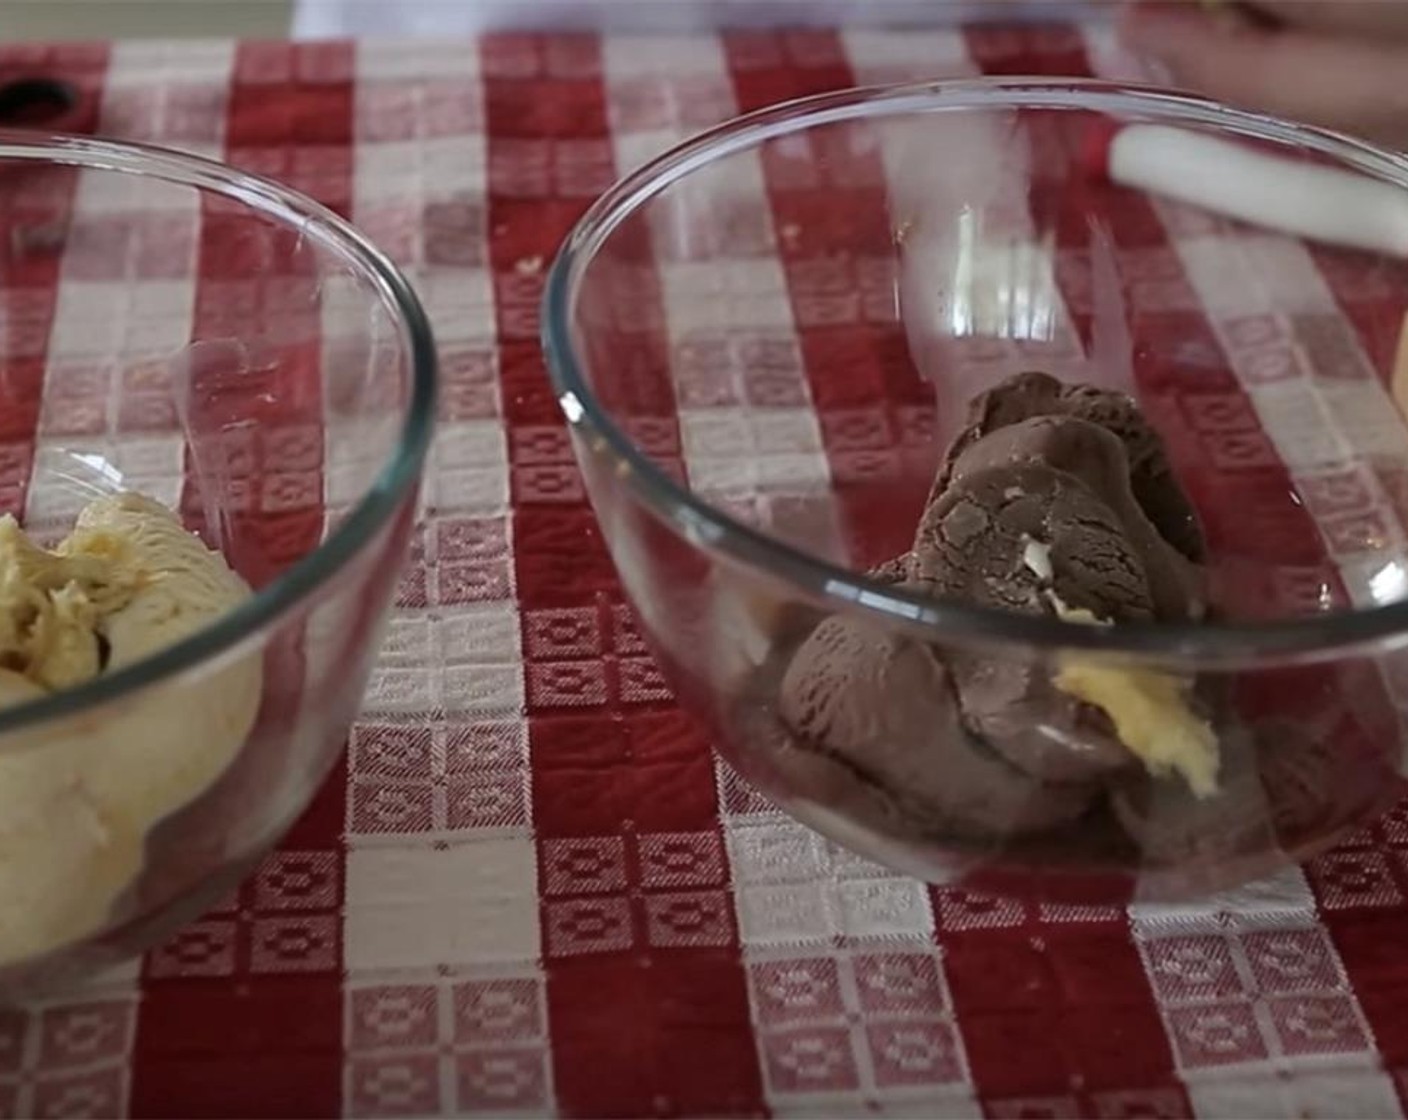 step 9 With the ice cream at room temperature take the three bowls which contains the panettone filling. In one bowl, place Vanilla Ice Cream (2 1/3 cups). In another bowl, place Coffee Ice Cream (2 1/3 cups). In a 3rd bowl, place the mascarpone mixture. Mix each bowl well.